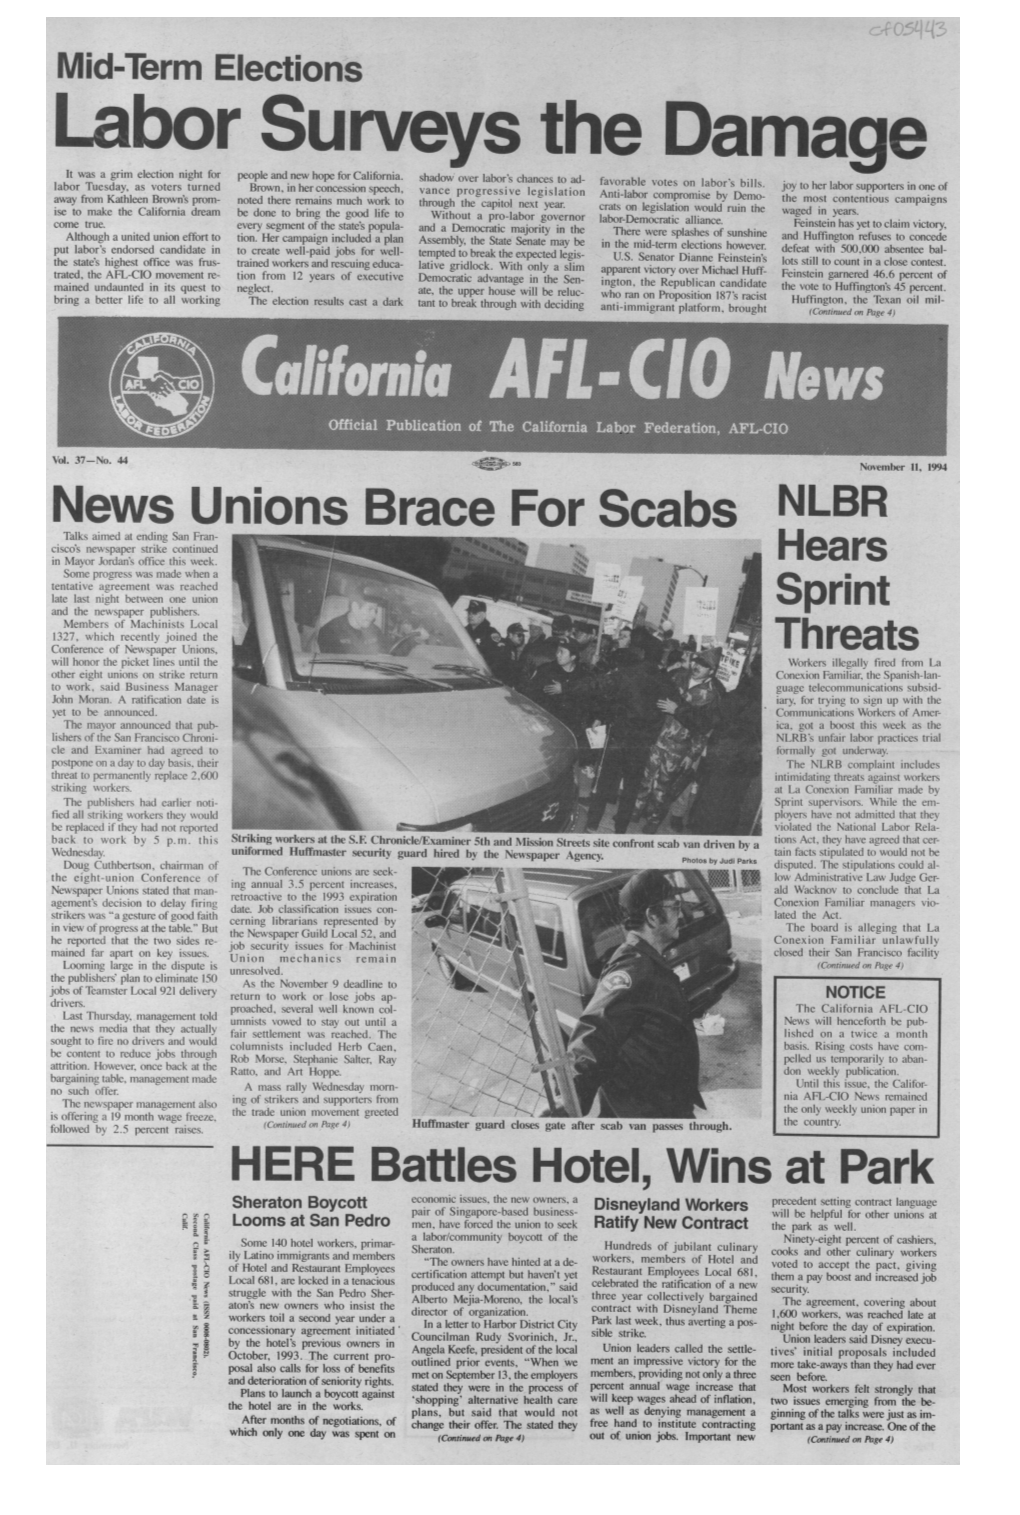 News Unions B3race For..Scabs NLBR Talks Aimed at Ending San Fran- Cisco's Newspaper Strike Continued in Mayor Jordan's Office This Week